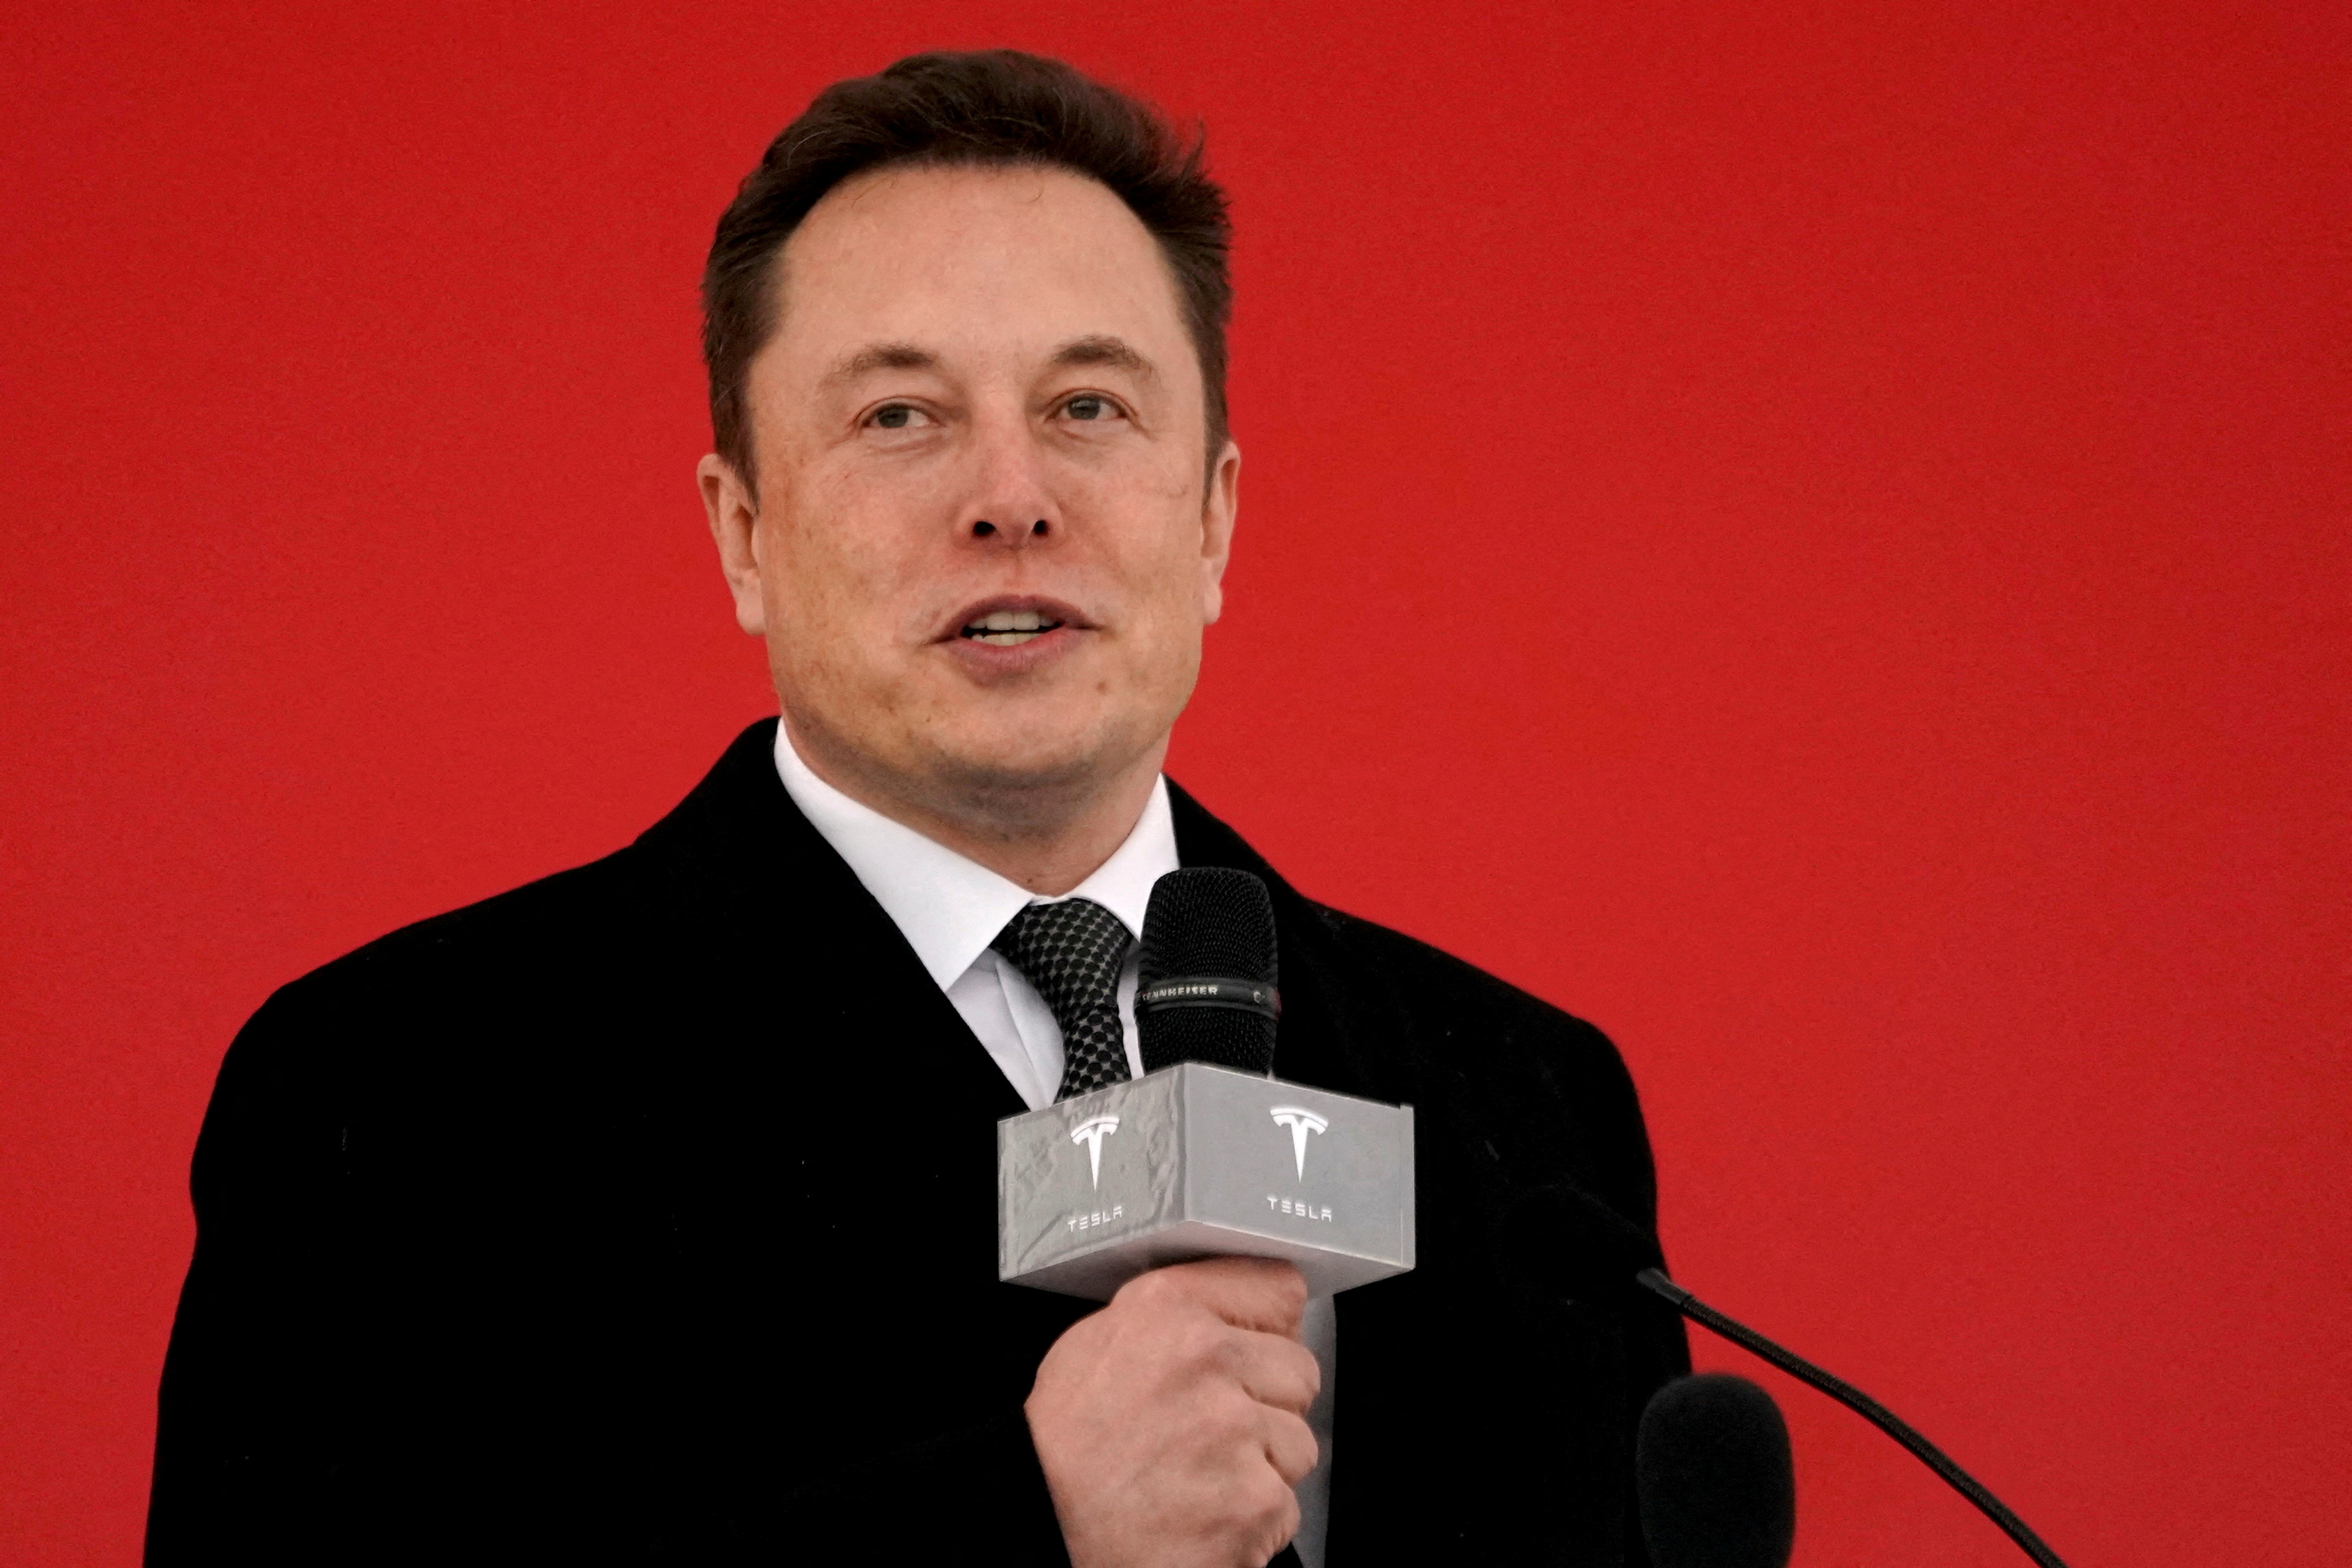 Elon Musk's ultimatum to Tesla employees: 'Come to office or get out'